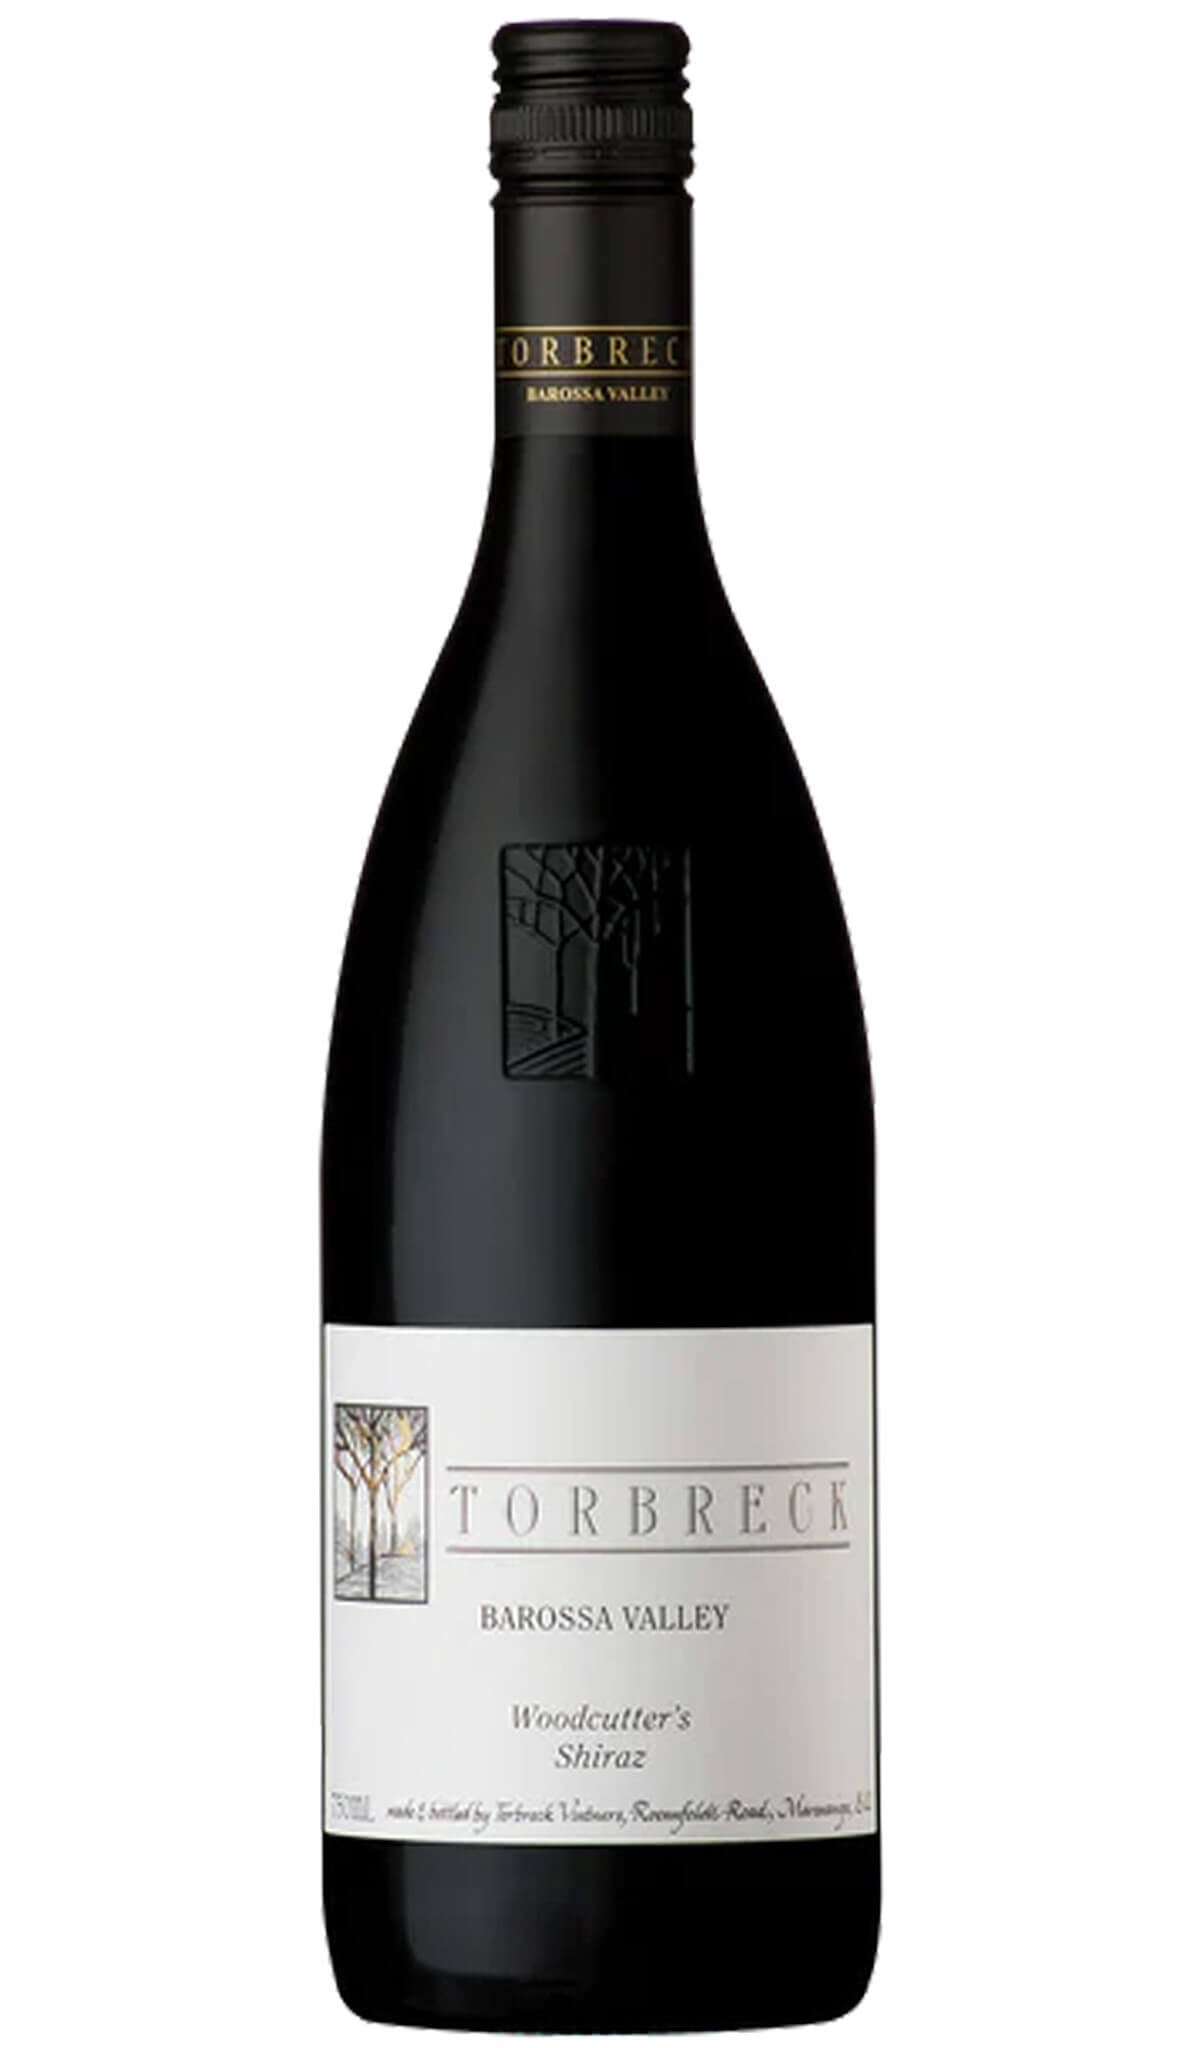 Find out more or buy Torbreck Woodcutter's Shiraz 2022 (Barossa Valley) online at Wine Sellers Direct - Australia’s independent liquor specialists.